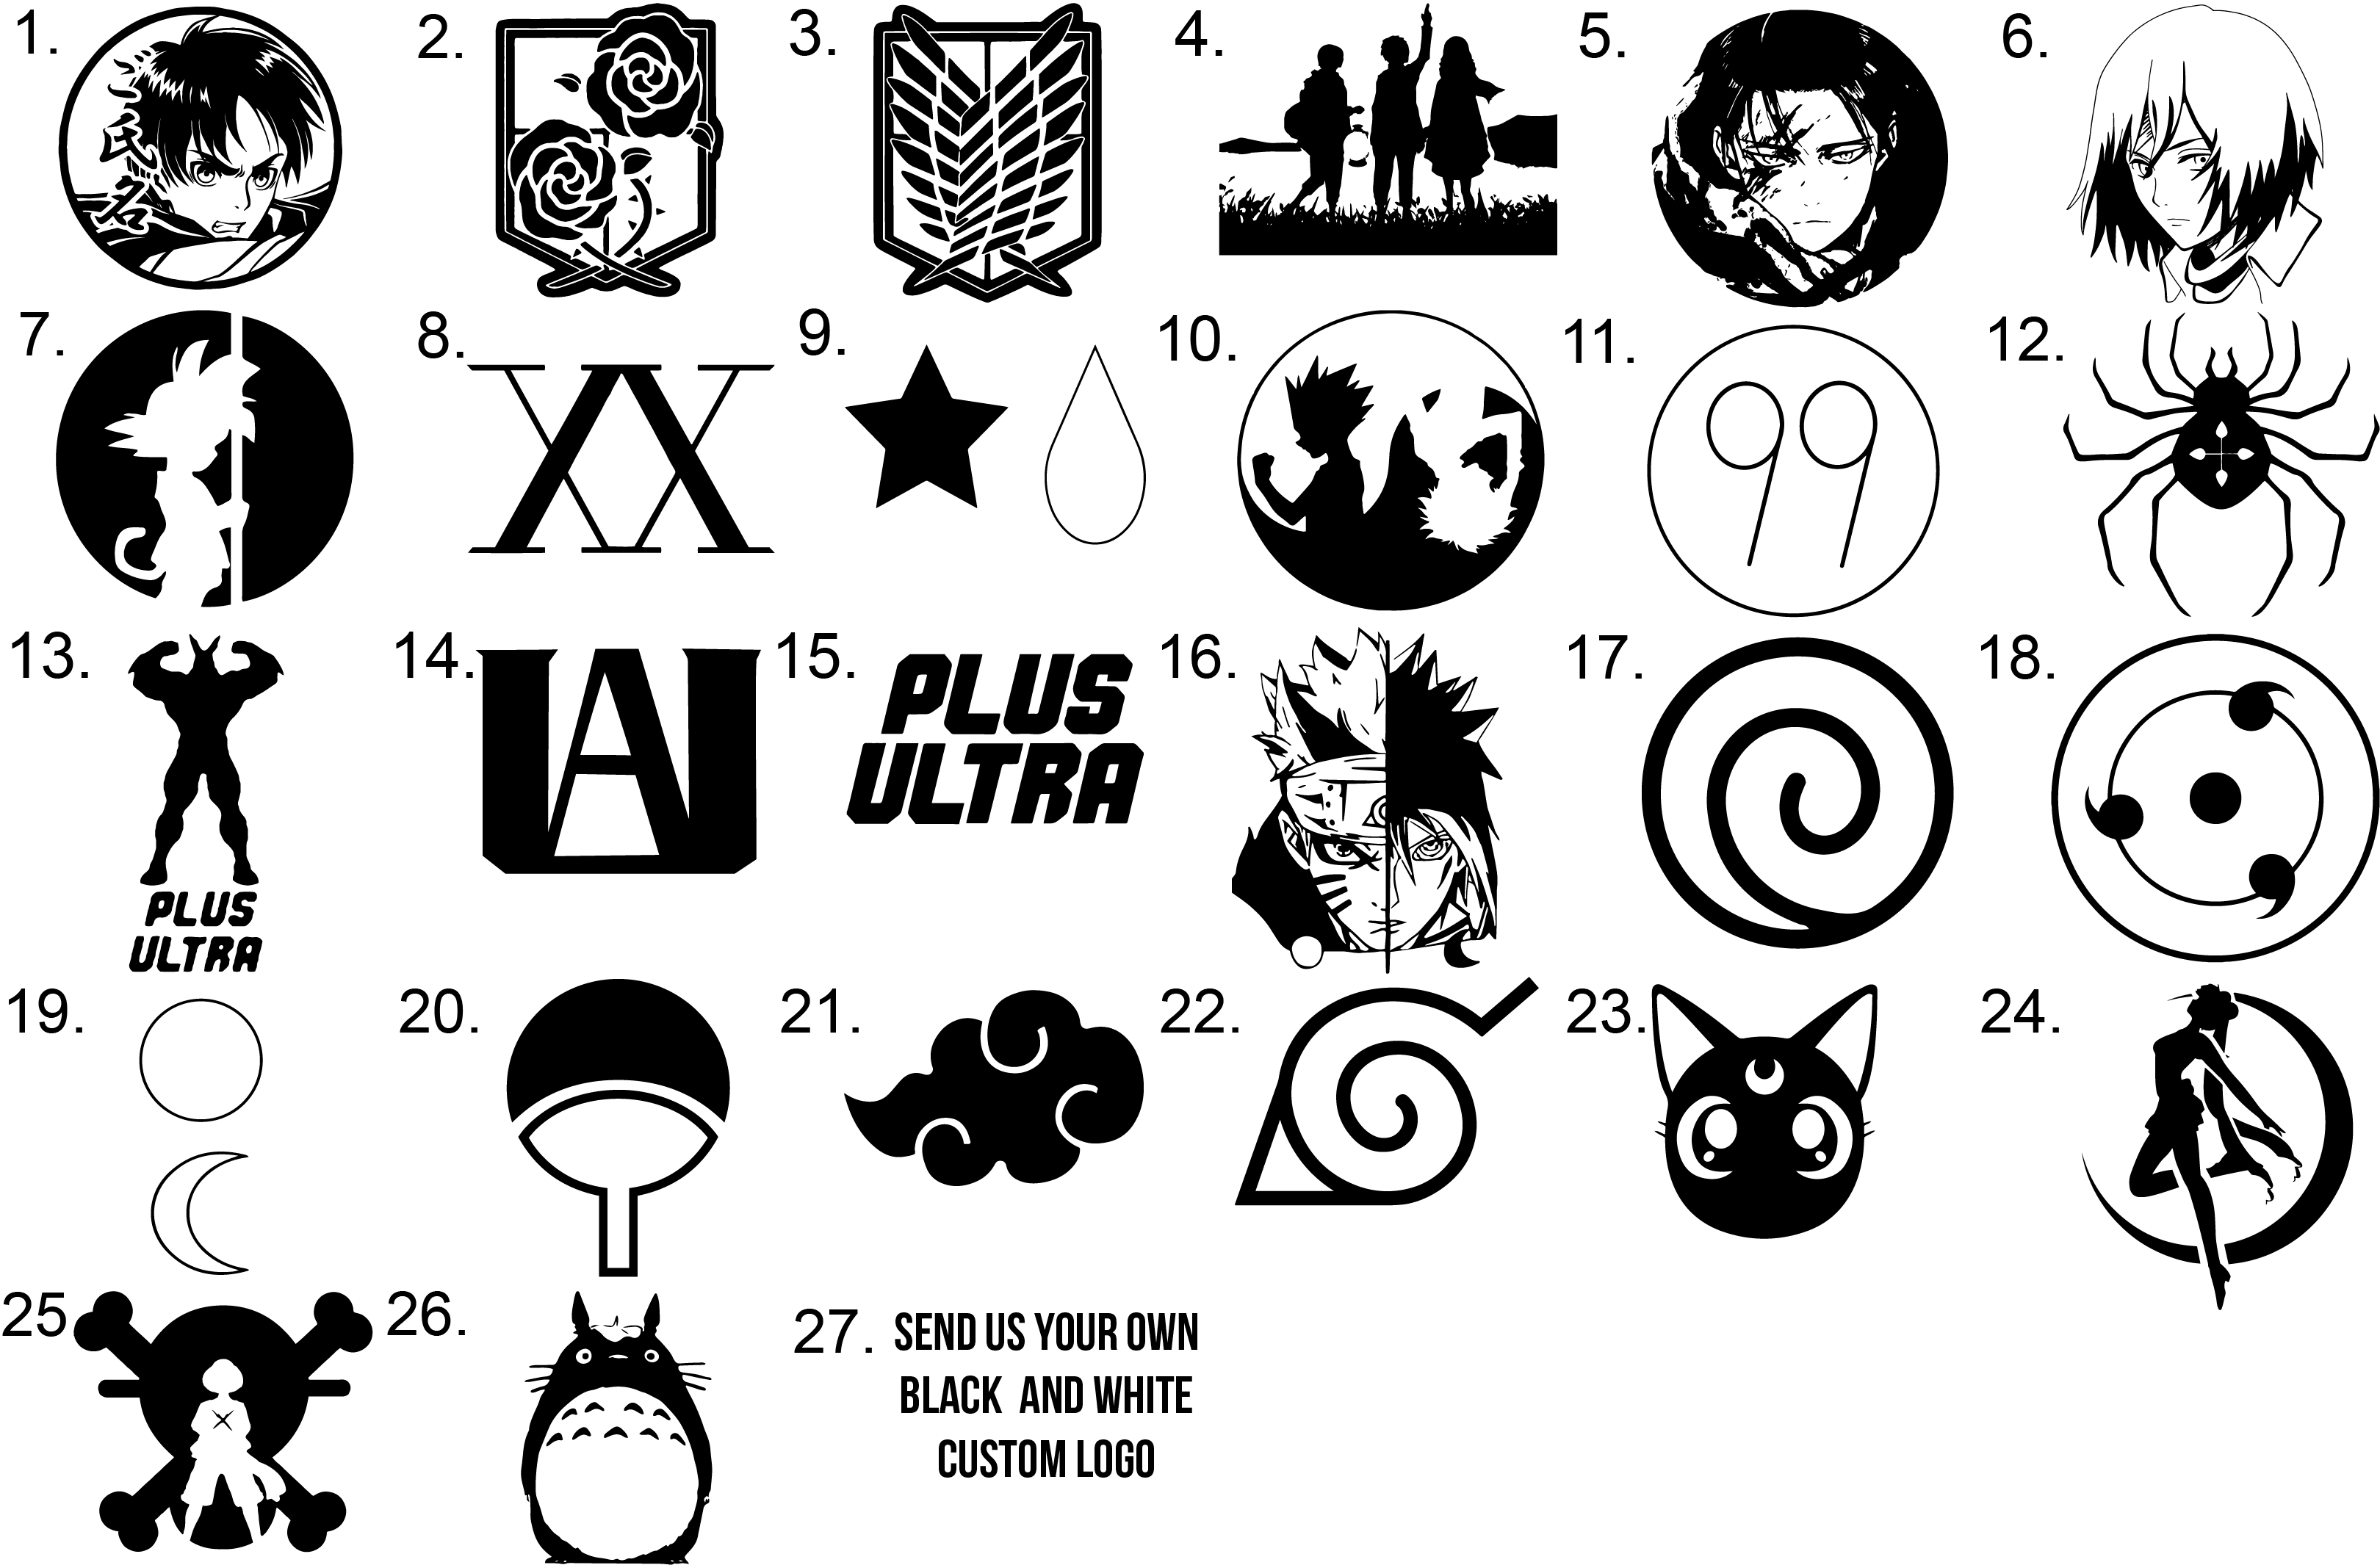 25 Popular Anime Symbols With The Most Influence (Ranked)